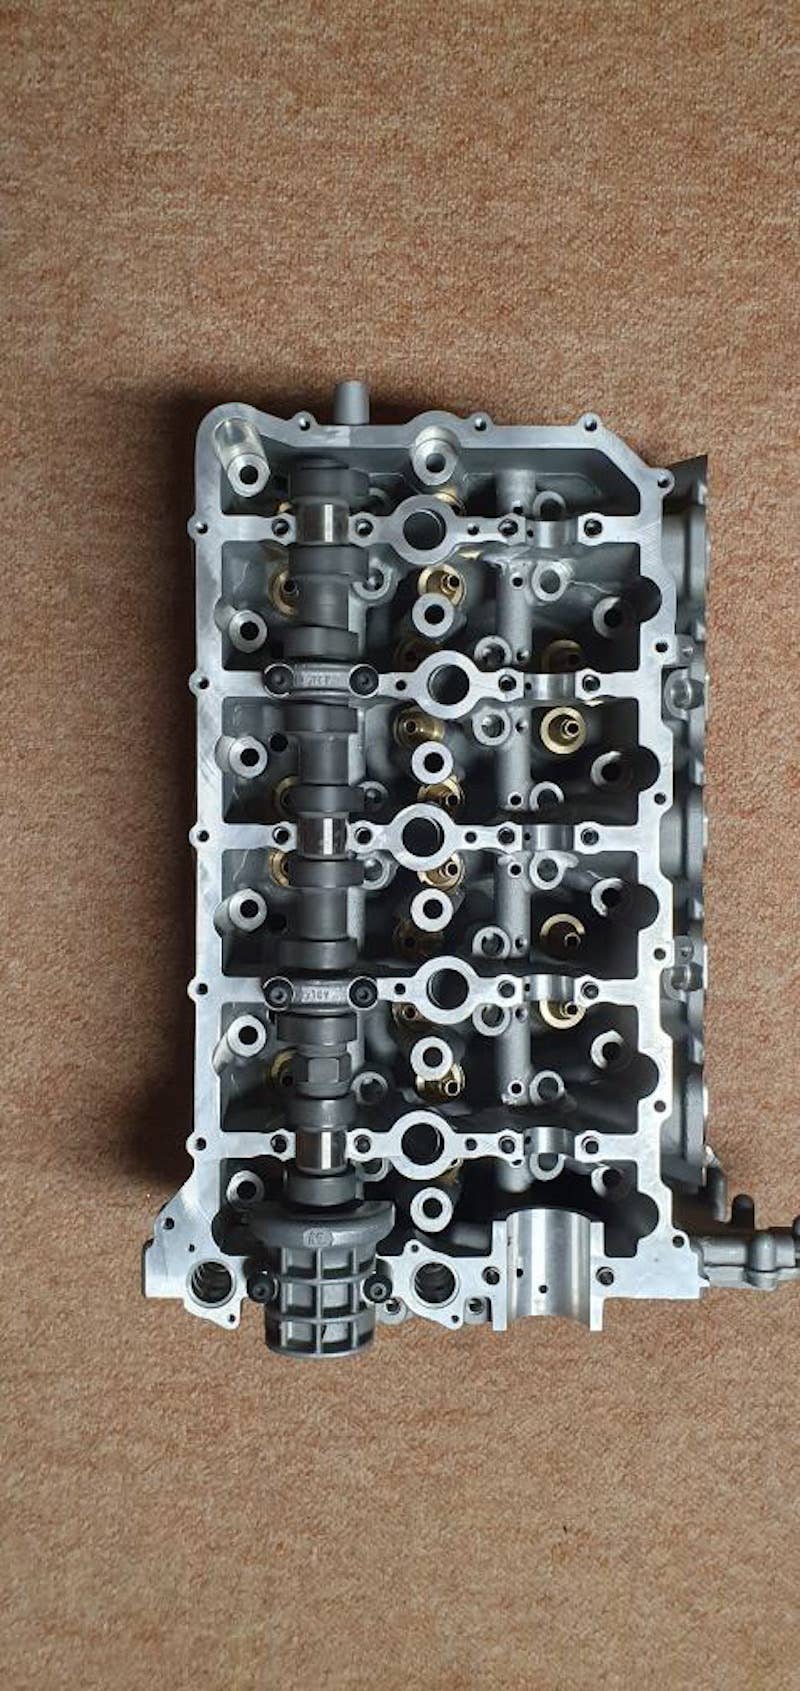 Disassembled prototype VW W10 engine, top side of cylinder head